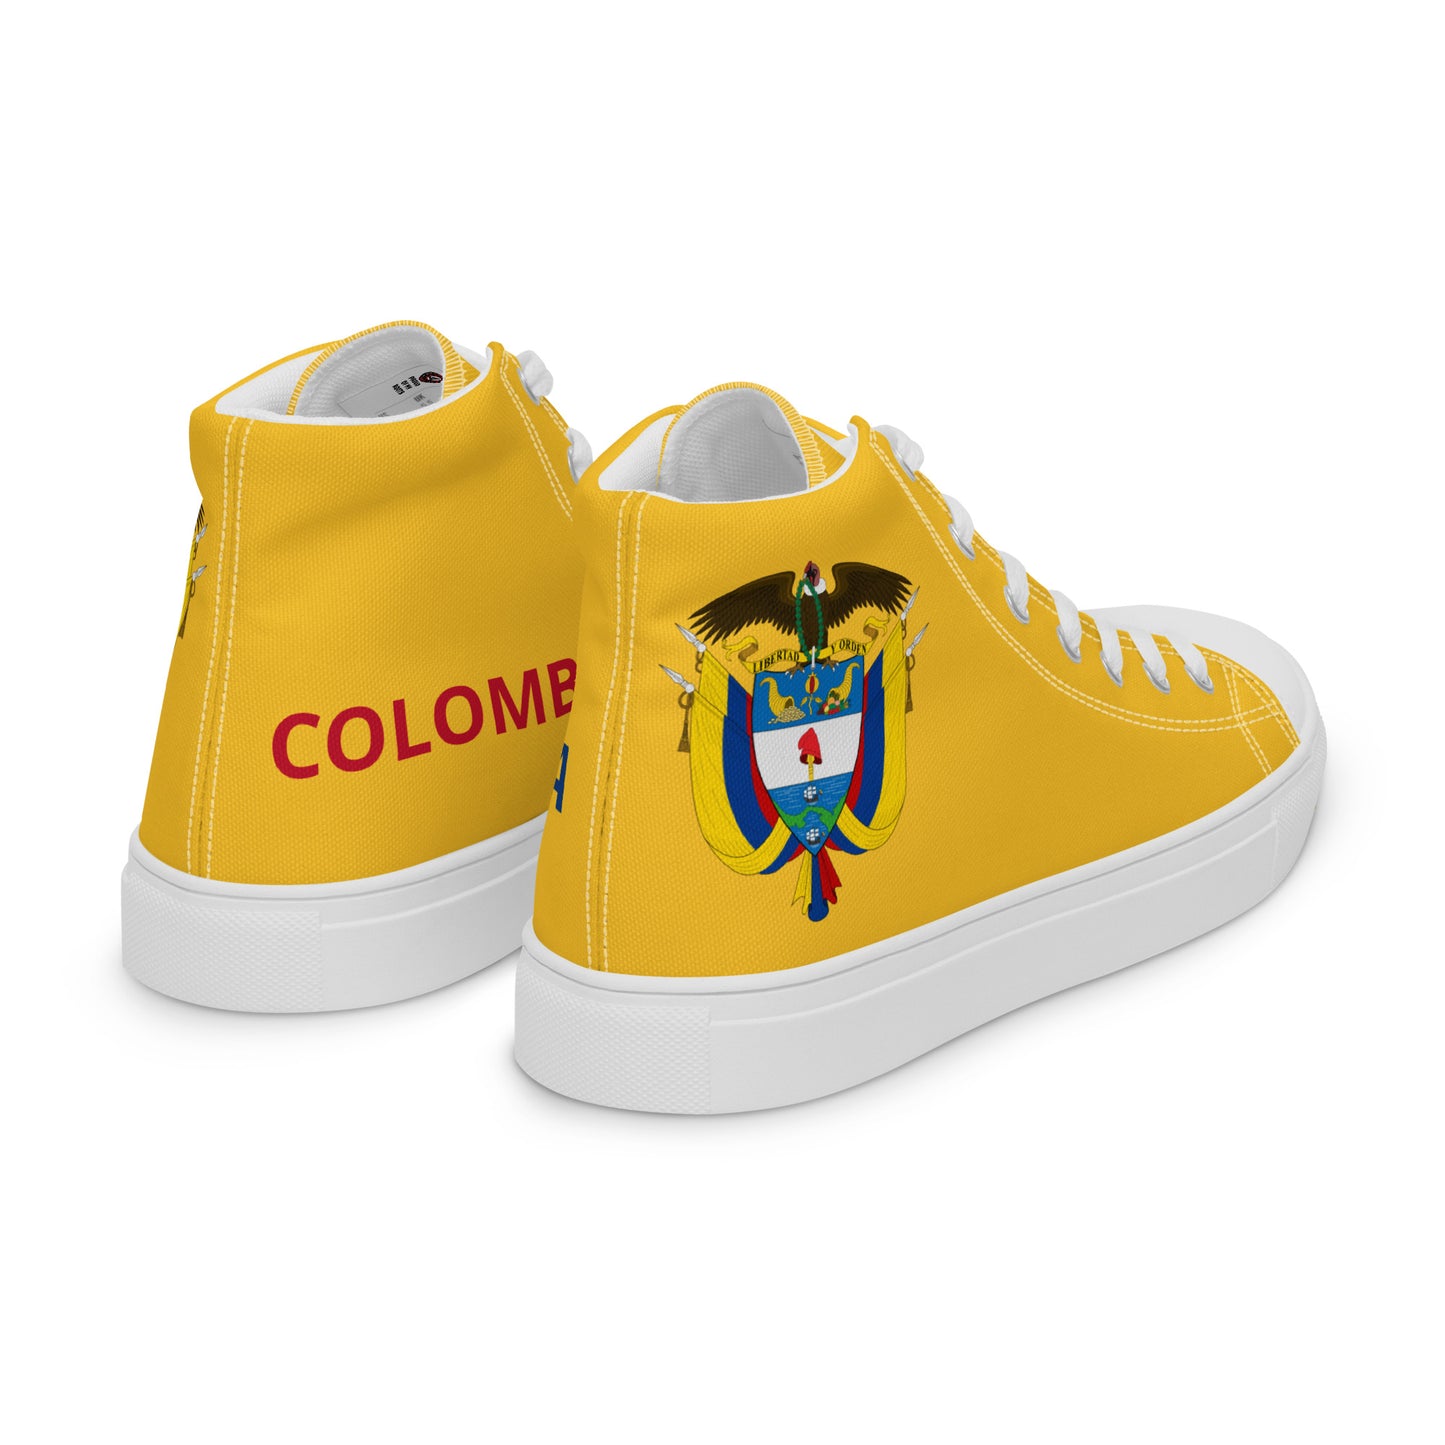 Colombia - Women - Yellow - High top shoes